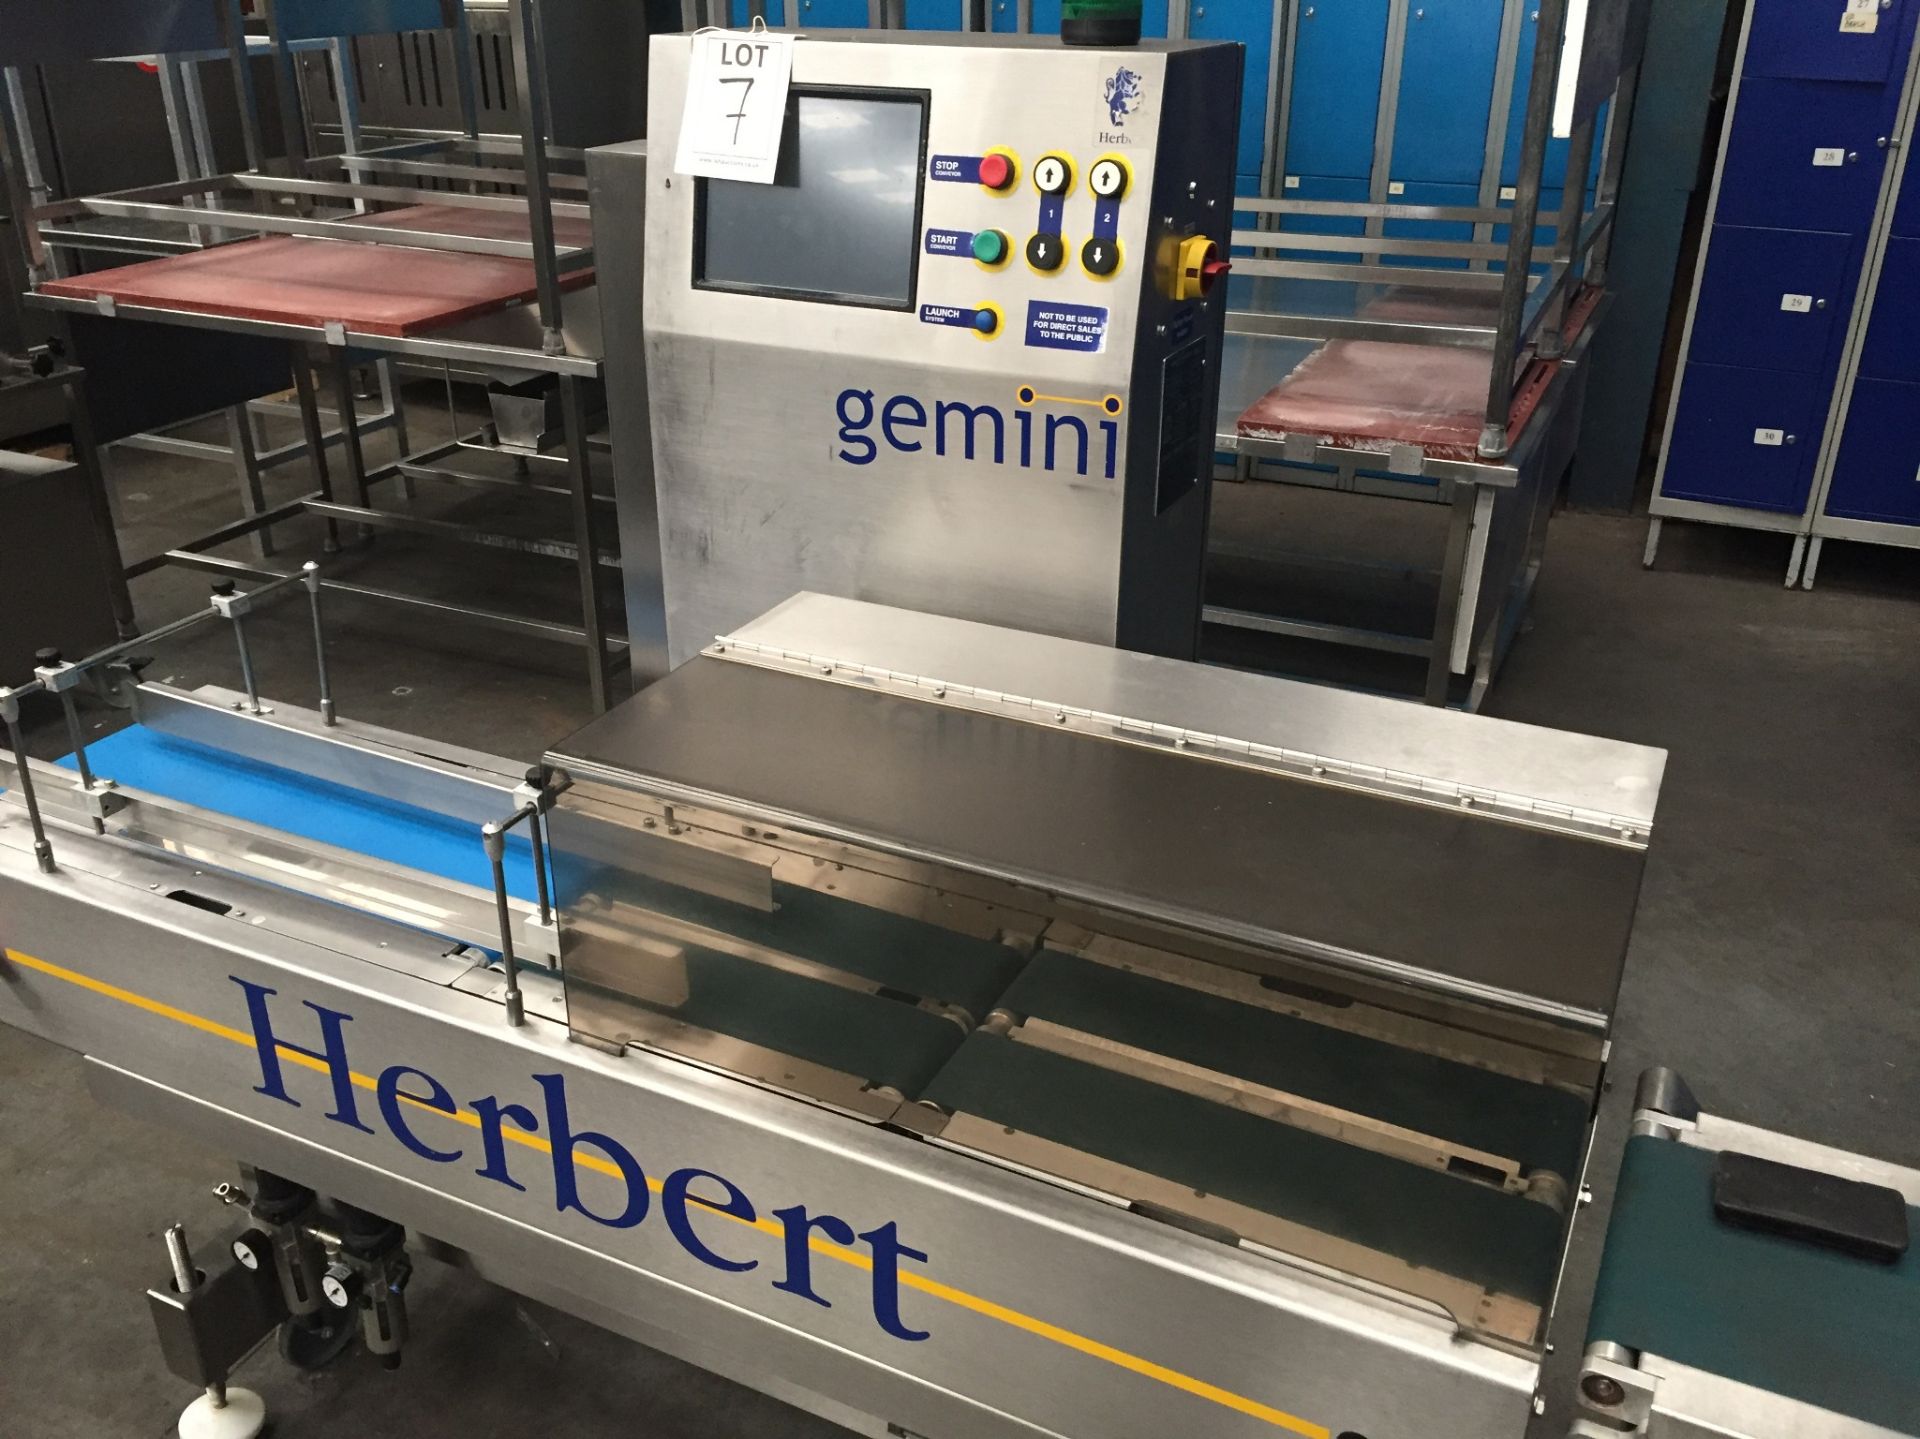 Herbert Gemini Checkweigher, year 2003, weighing 0,1 kg - 4 kg, 2 line unit, overall dimensions: - Image 2 of 6